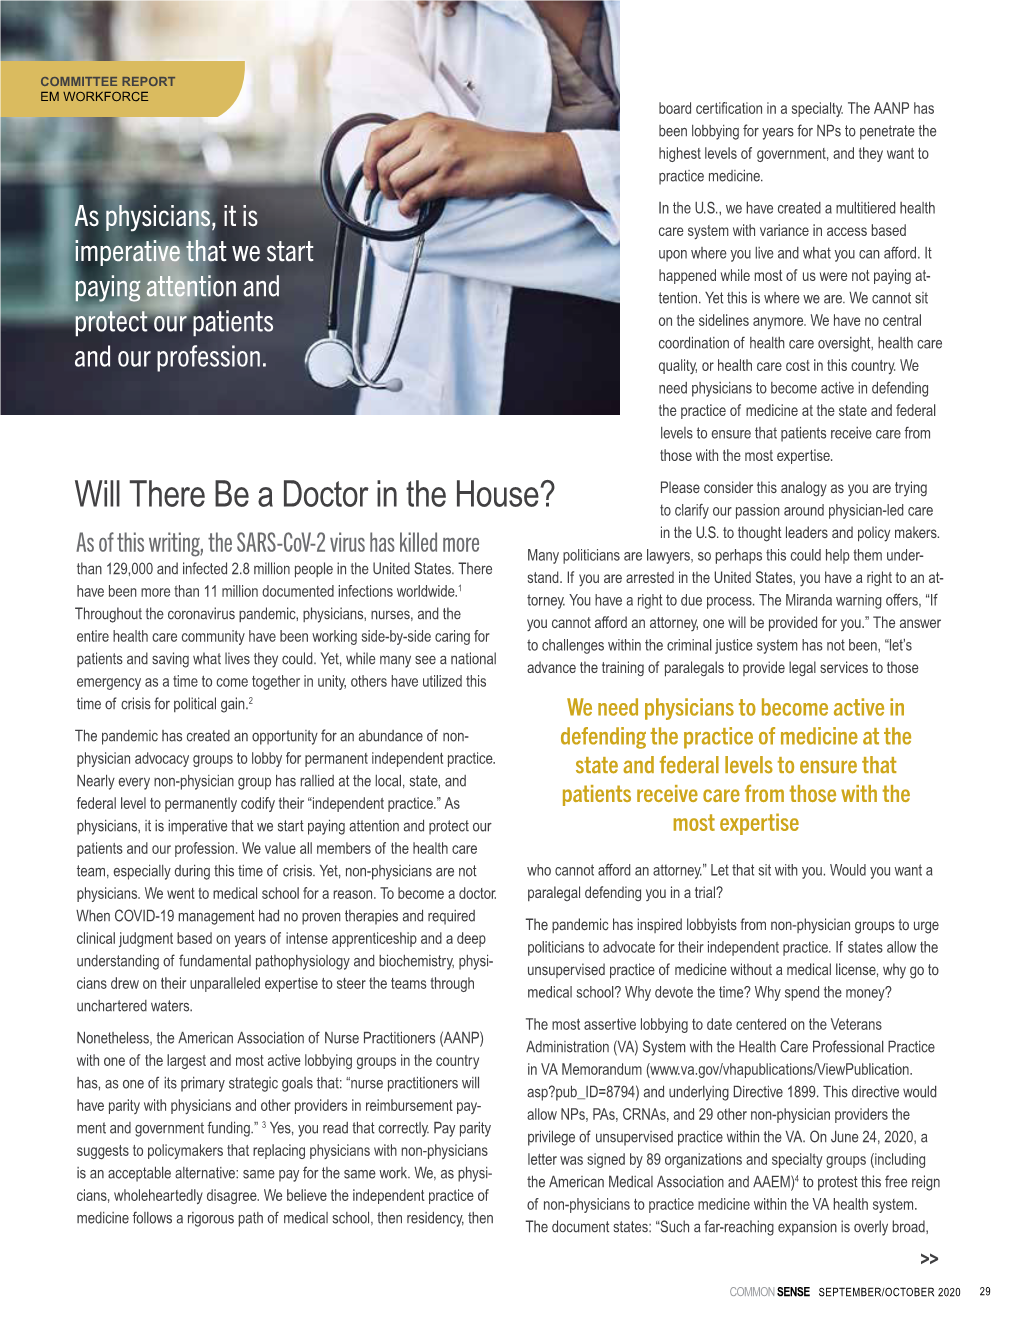 Will There Be a Doctor in the House? to Clarify Our Passion Around Physician-Led Care in the U.S